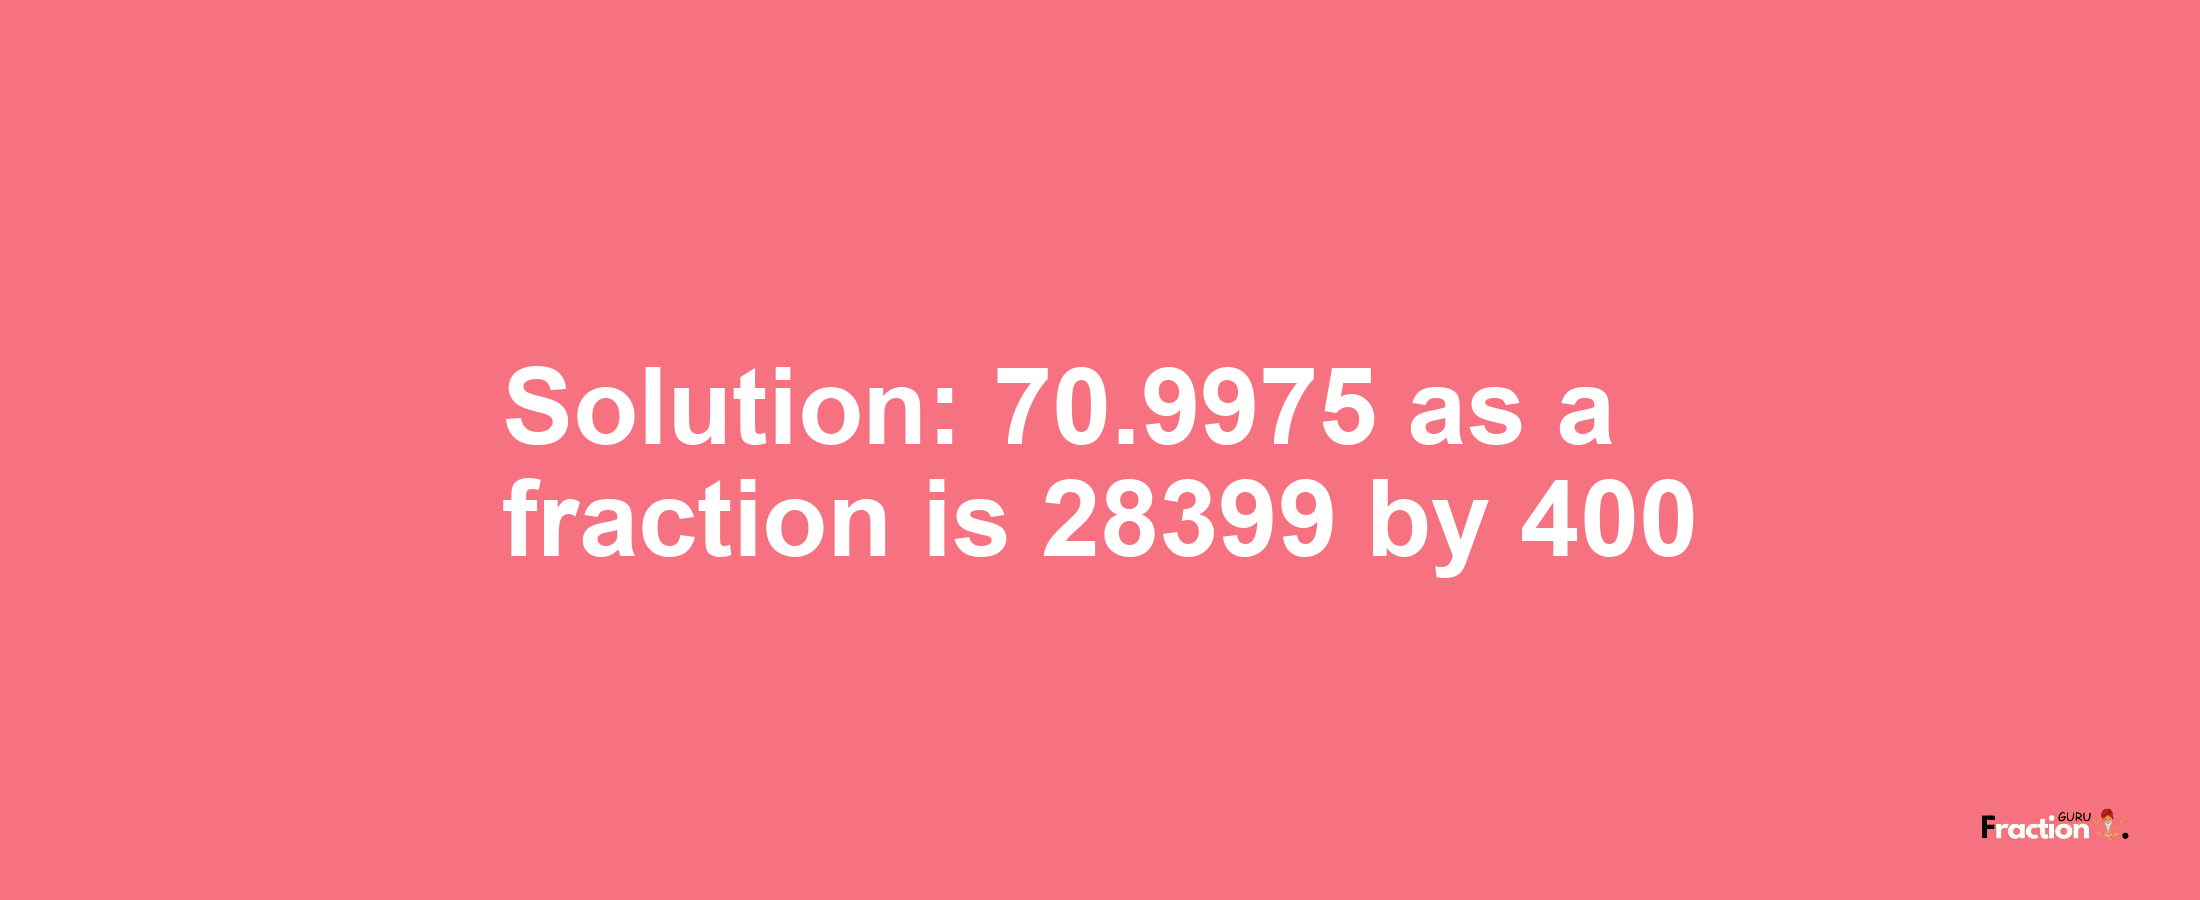 Solution:70.9975 as a fraction is 28399/400